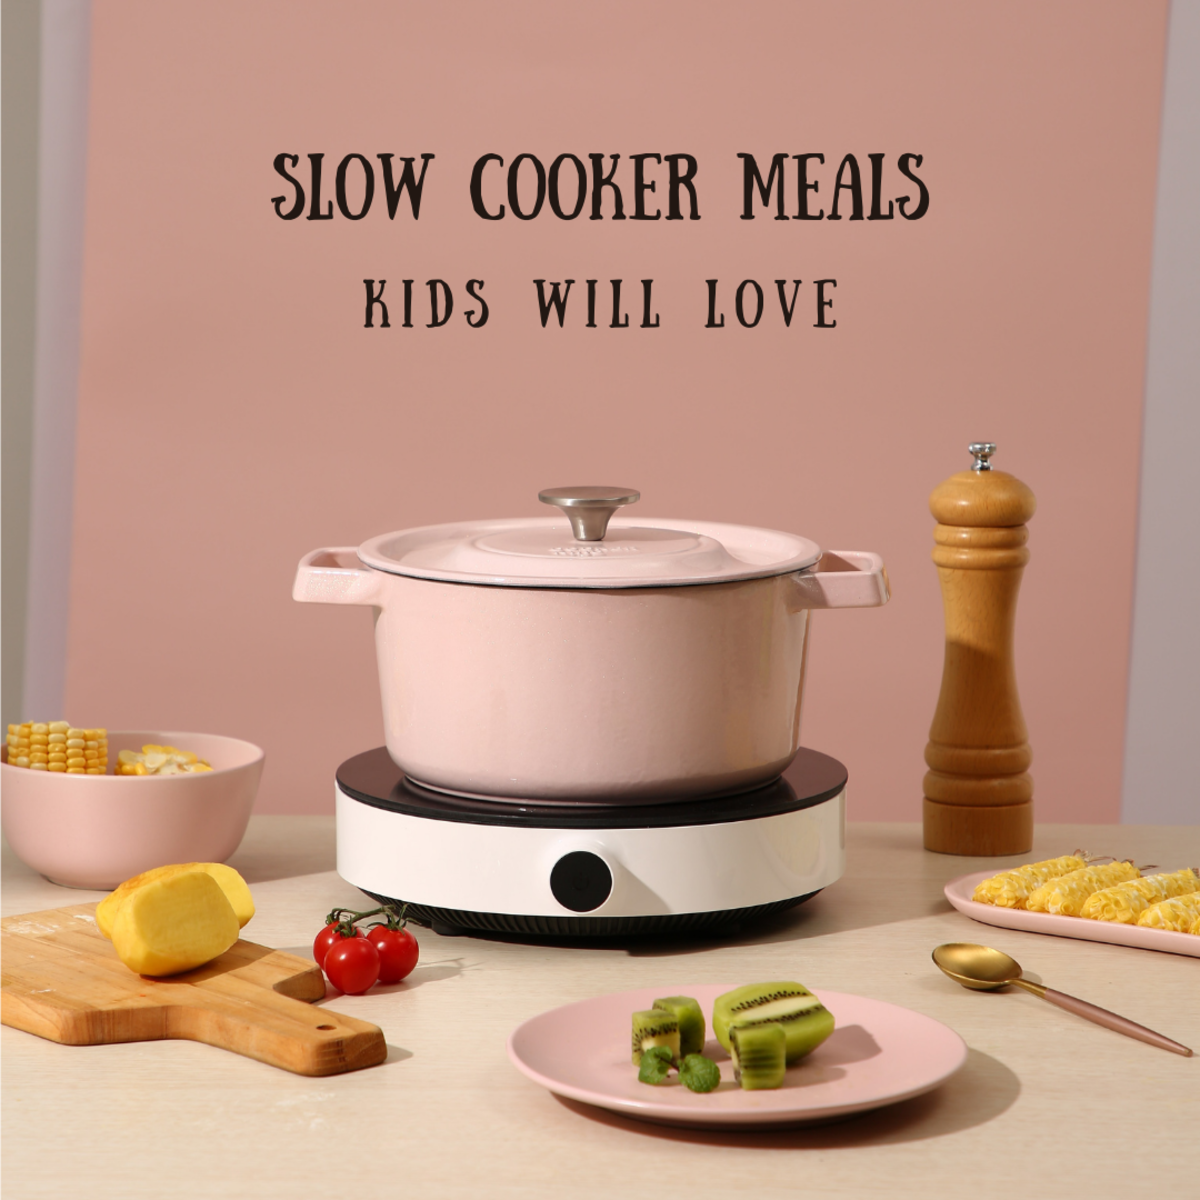 Slow Cooker Meatloaf and Chicken Chili Recipes (Kid-Friendly!)